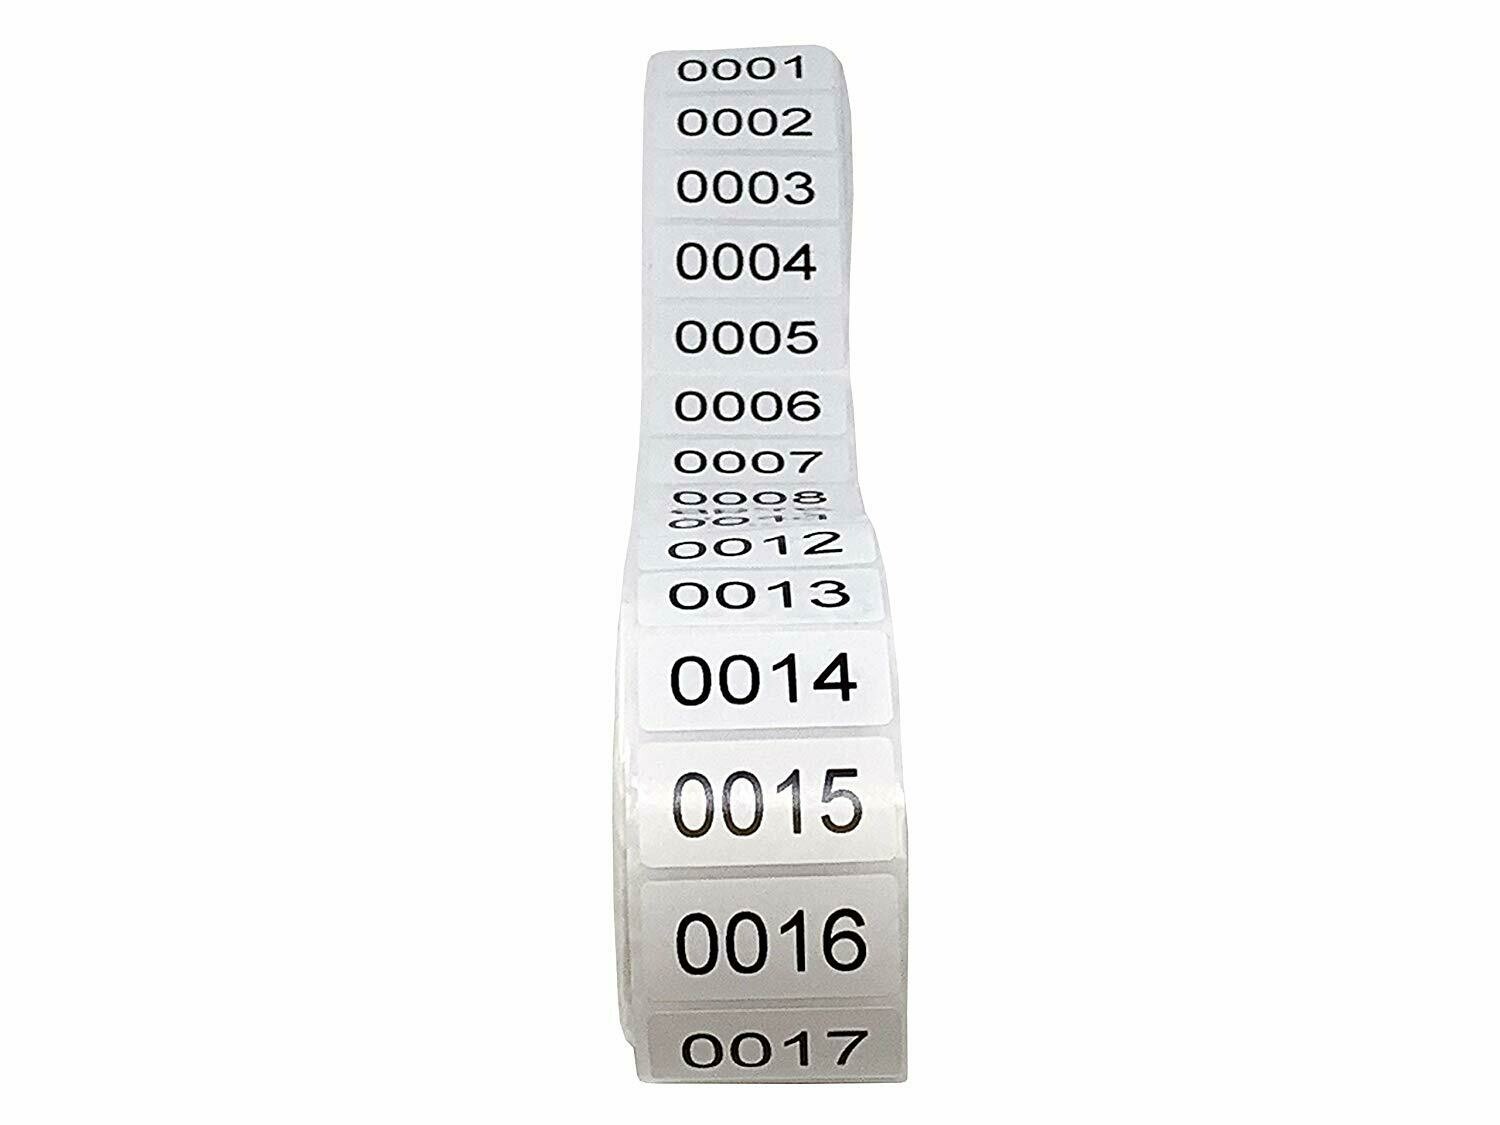 Tag-A-Room Inventory Labels Consecutive Number Stickers (1 Roll)